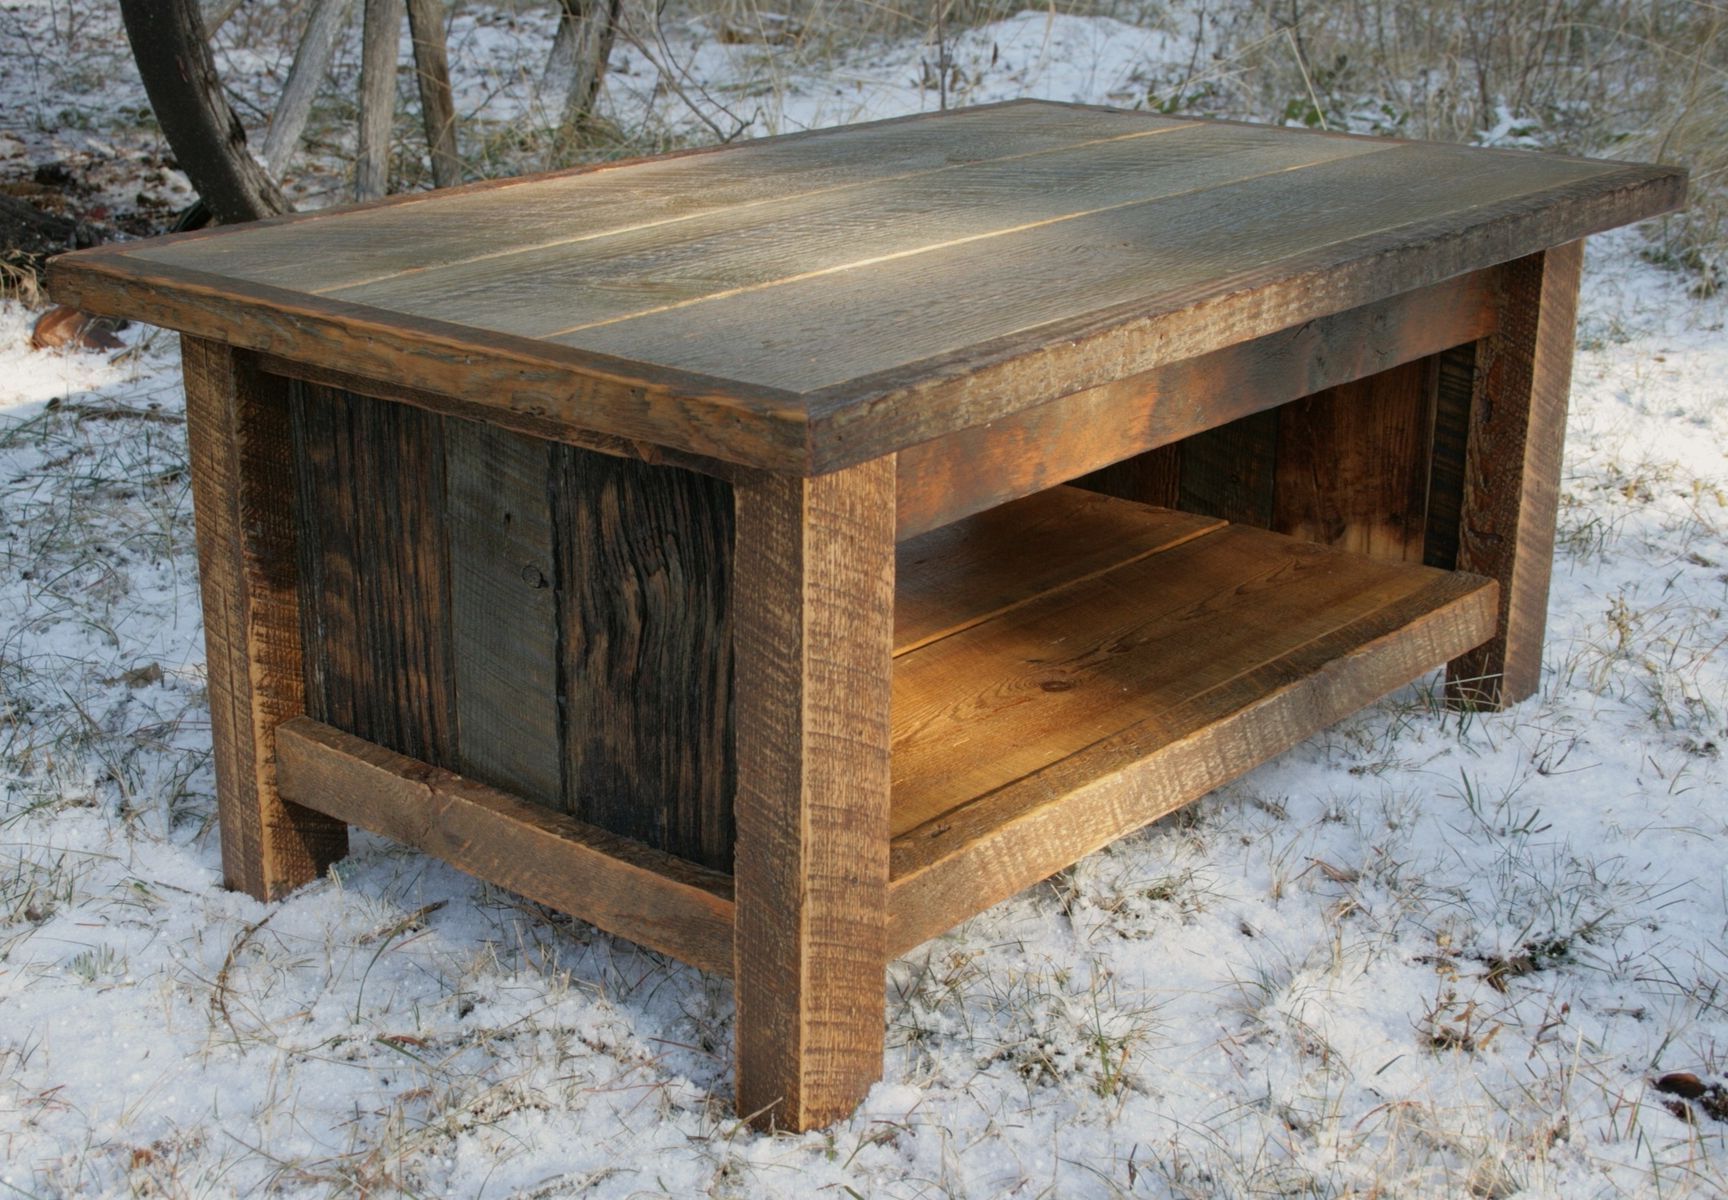 This Is A Custom Made Coffee Table Constructed Out Of Reclaimed Pertaining To Rustic Wood Coffee Tables (Gallery 17 of 20)